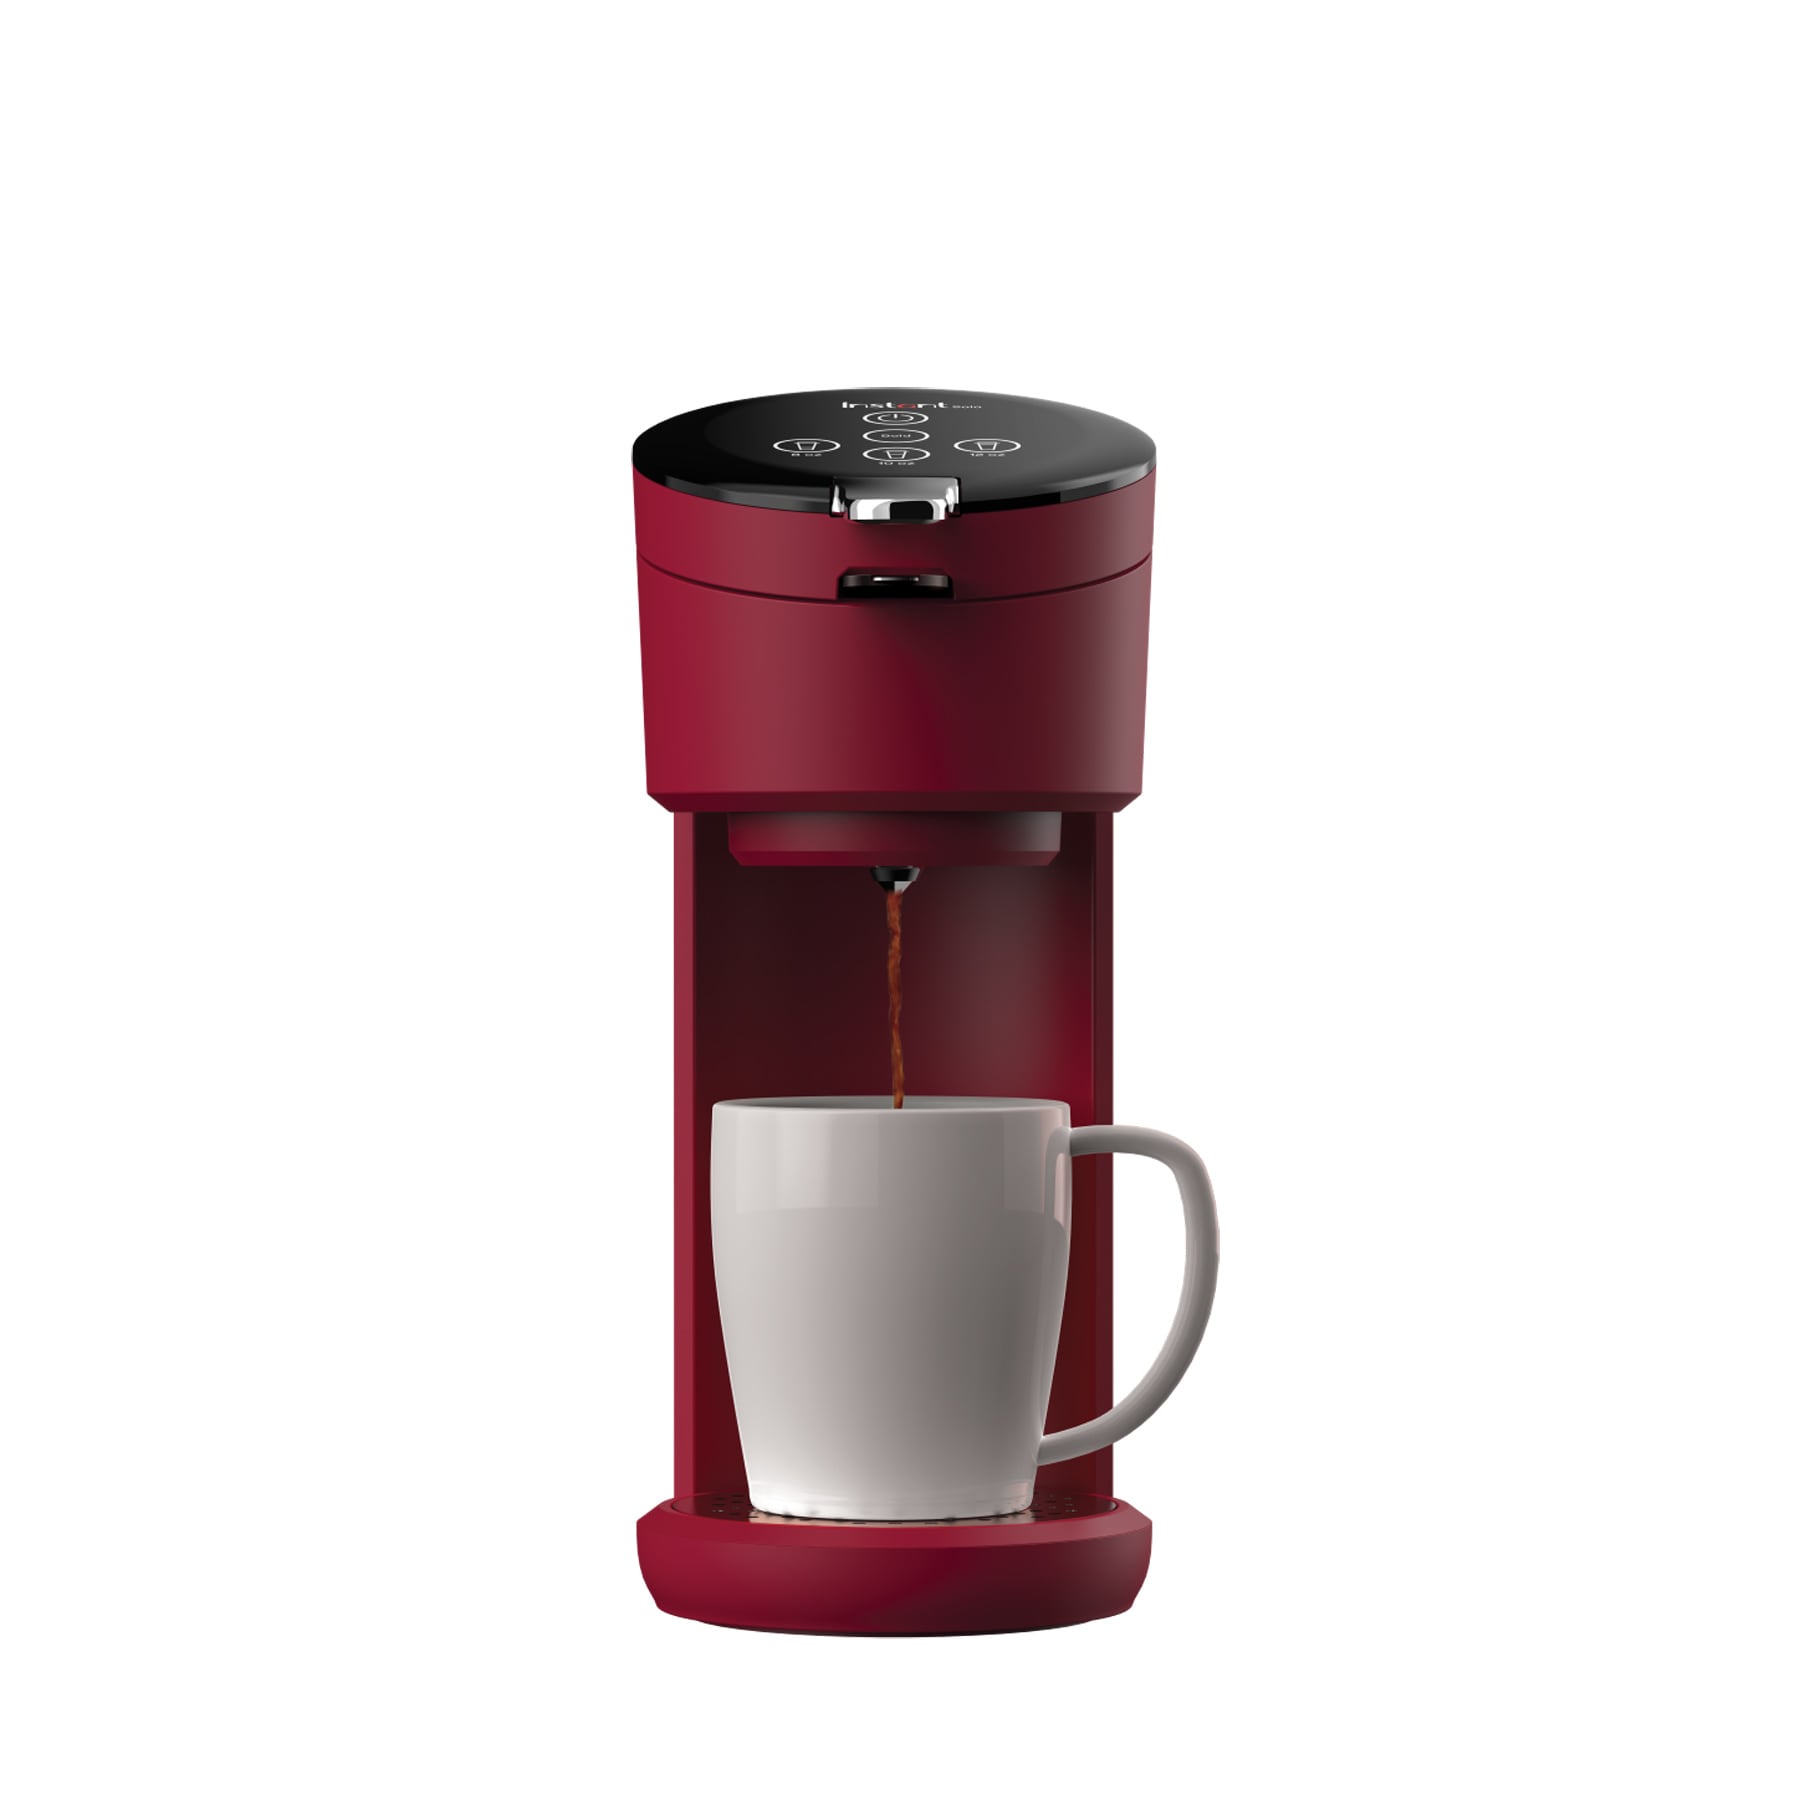 Instant Solo WiFi Connect Single Serve Coffee Maker, from The Makers of Instant Pot, Coffee Brewer, Includes Reusable Coffee Pod & Bold Setting